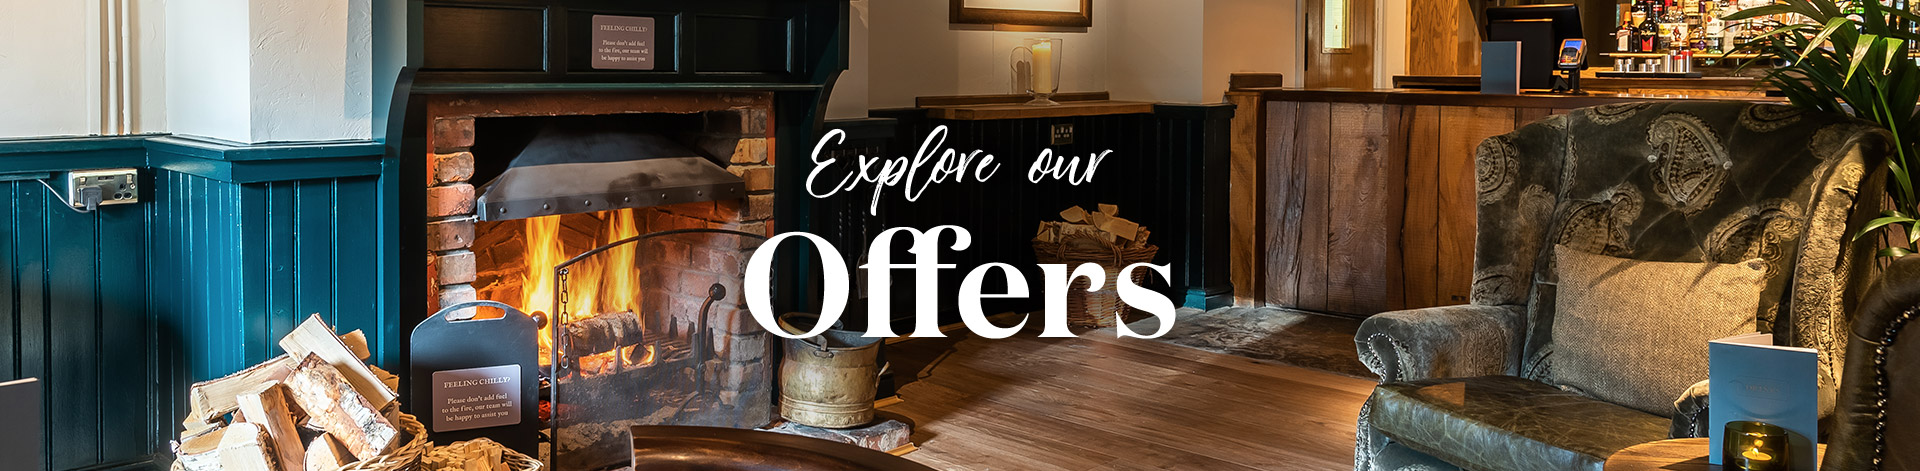 Our latest offers at The Little Owl